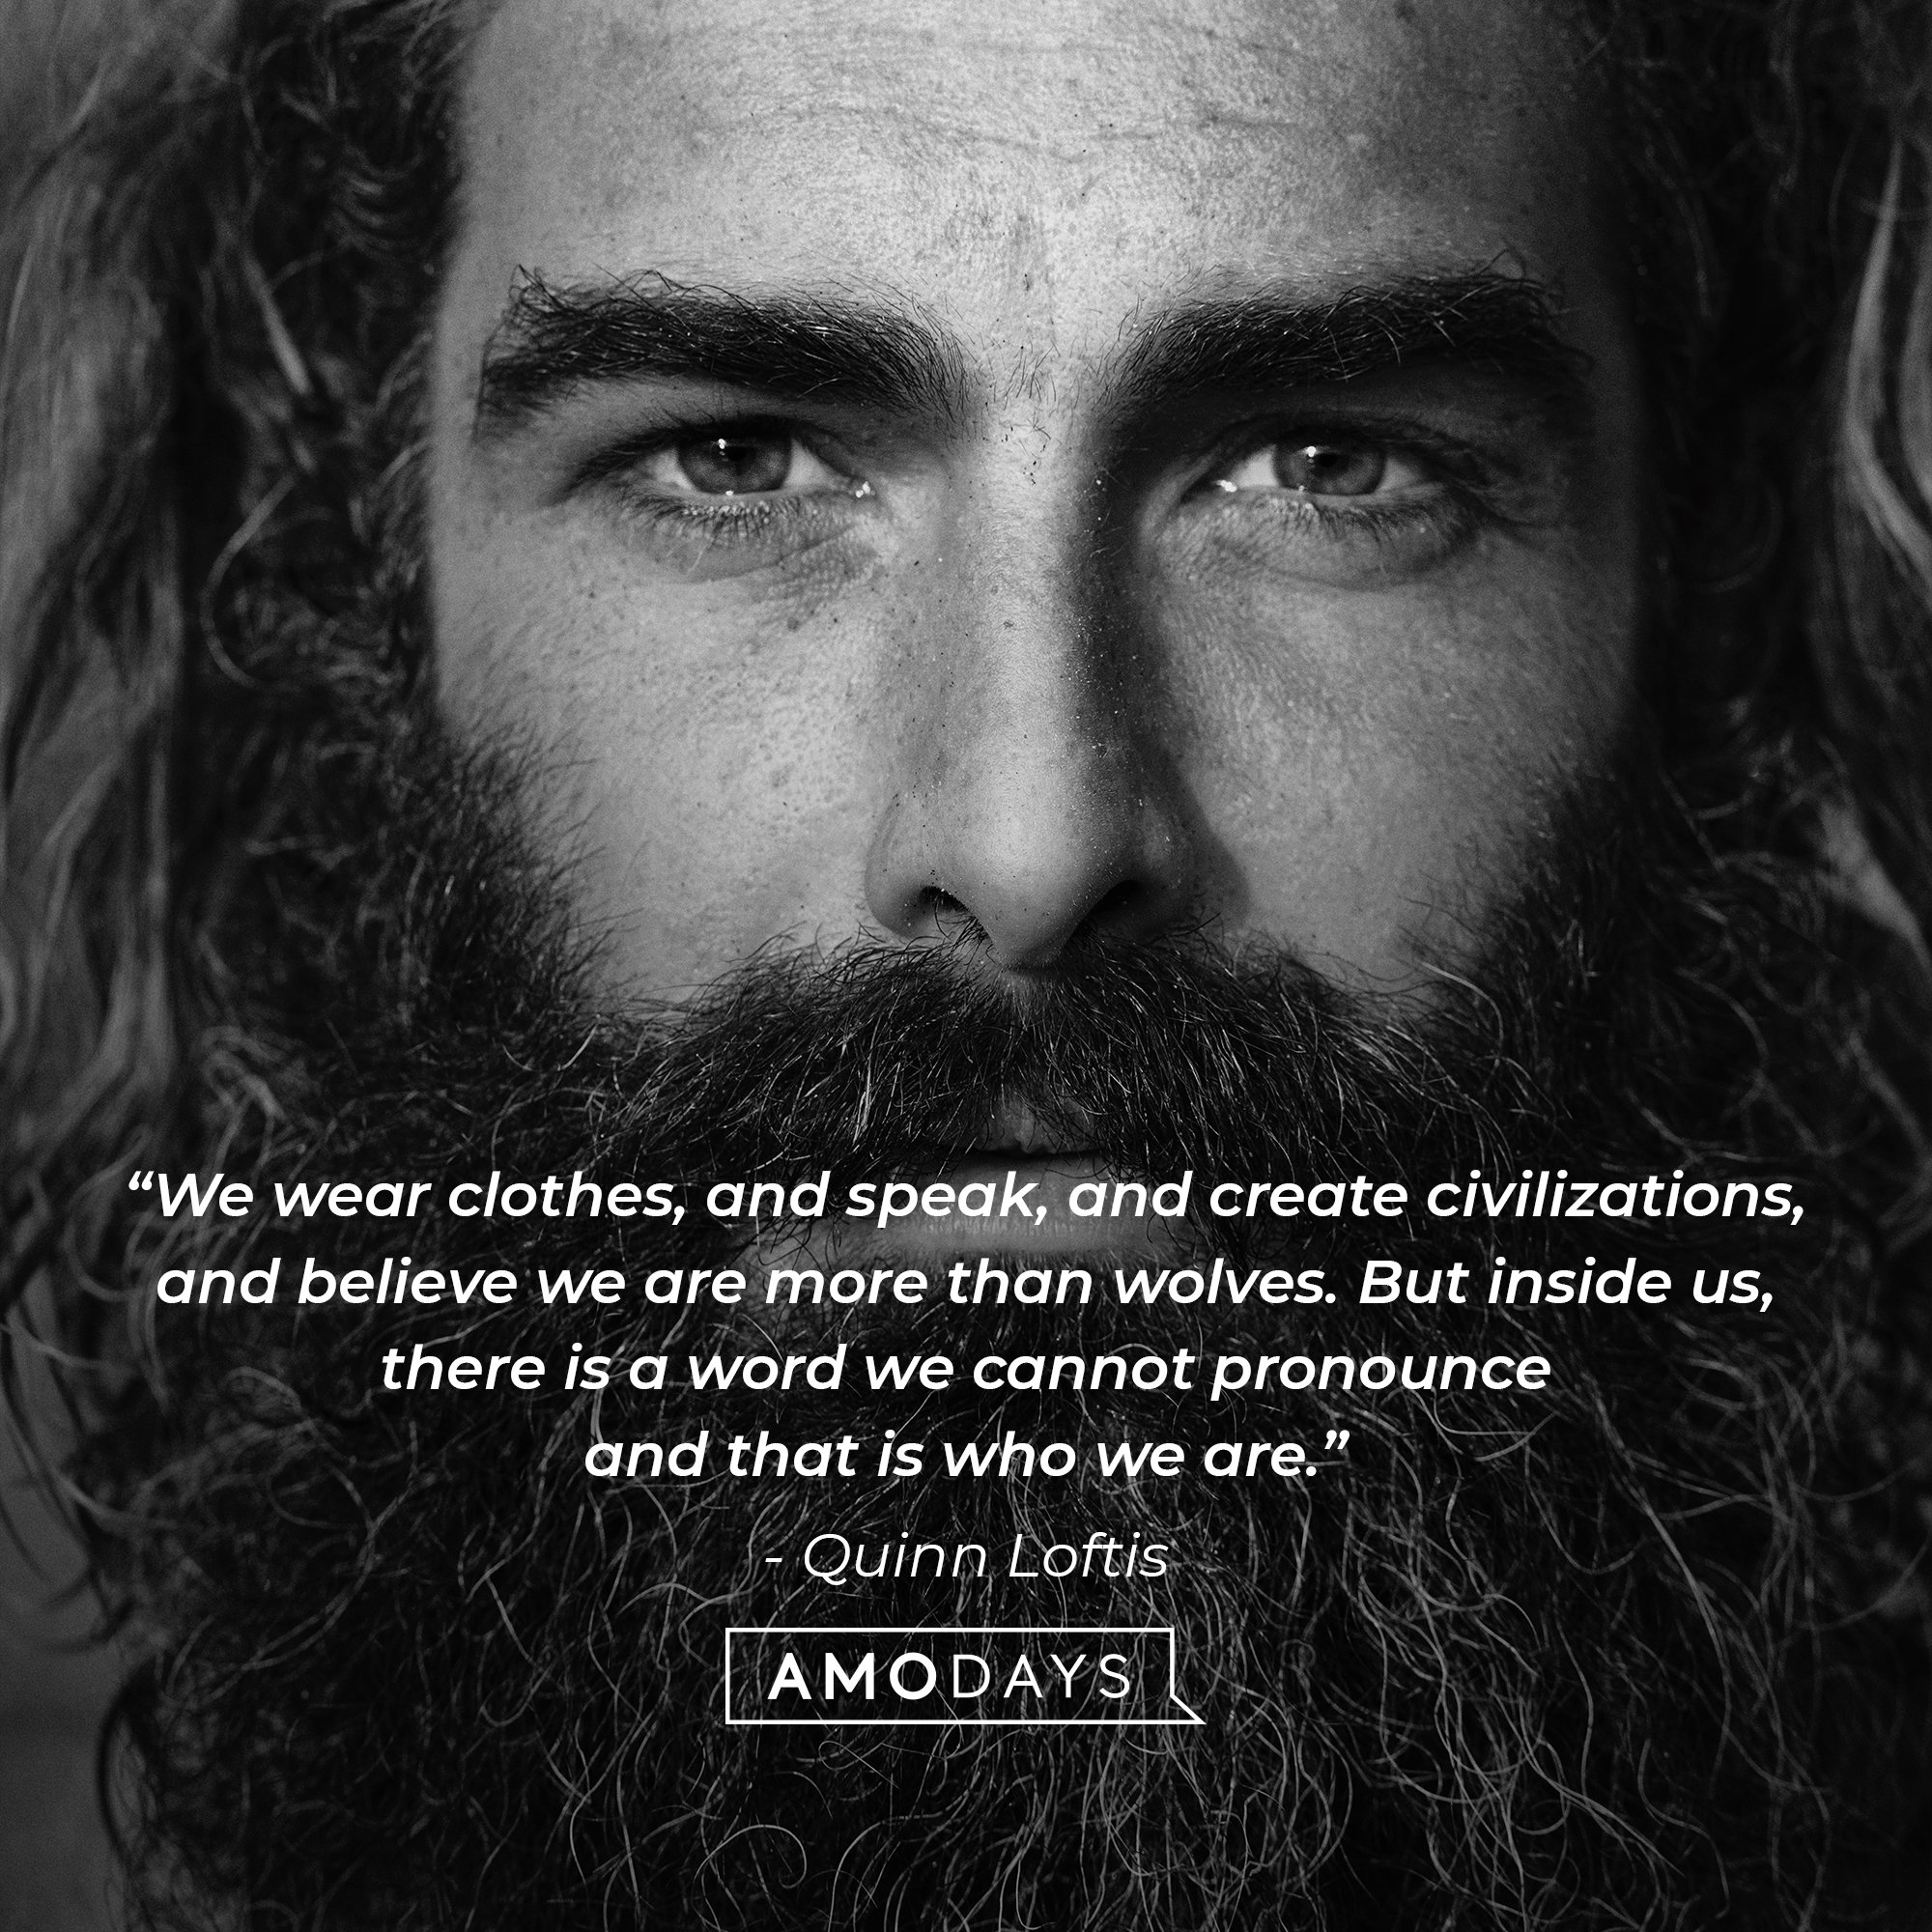 Anthony Marra's quote: “We wear clothes, and speak, and create civilizations, and believe we are more than wolves. But inside us, there is a word we cannot pronounce and that is who we are.” | Image: AmoDays